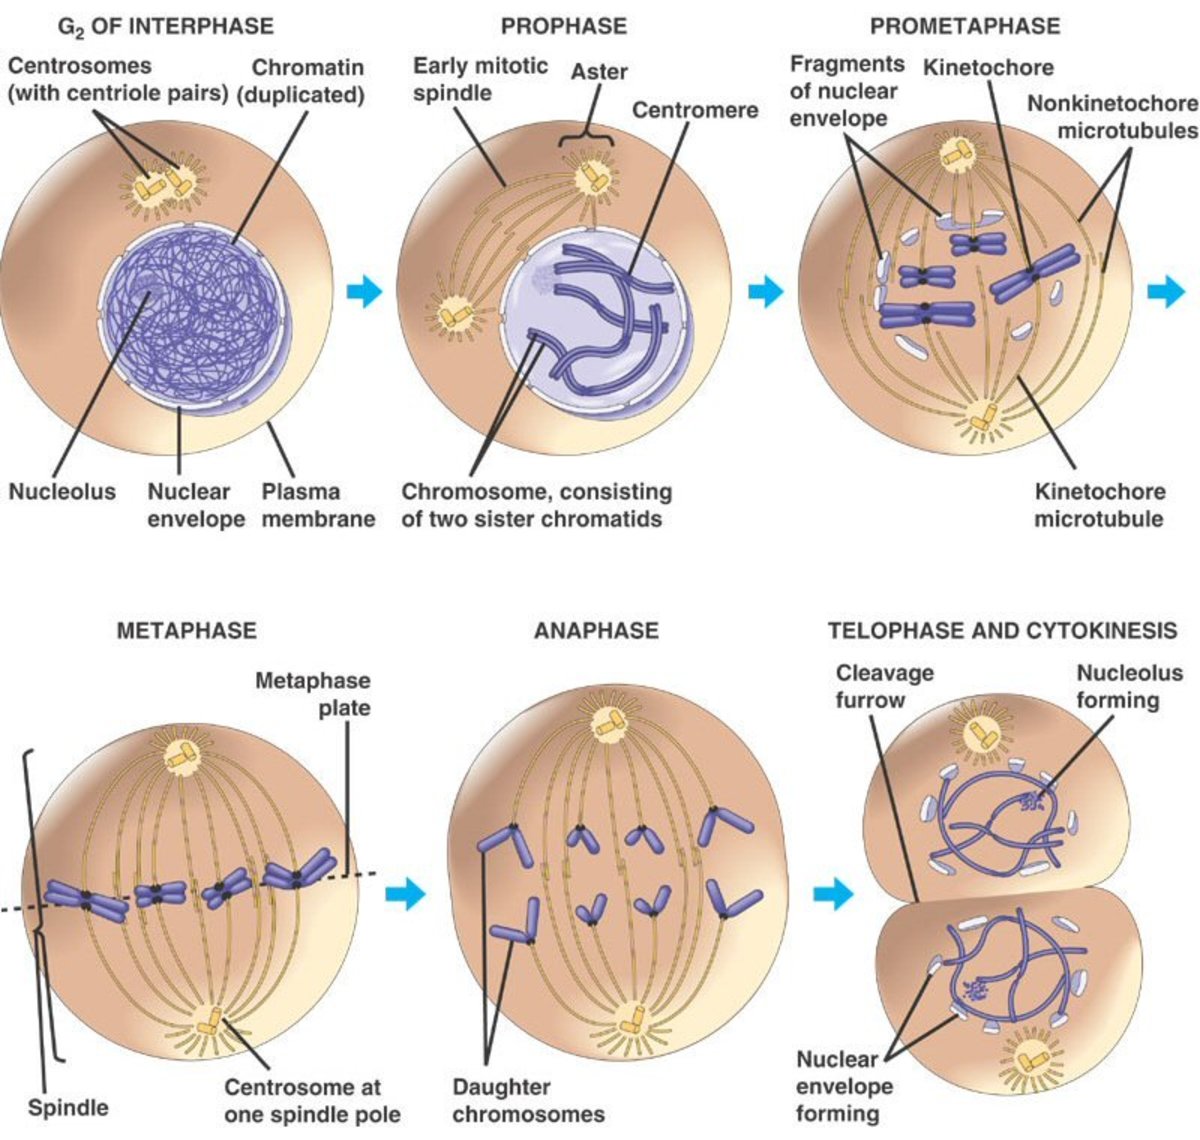 Stages of the Cell Cycle Mitosis (Metaphase, Anaphase and Telophase